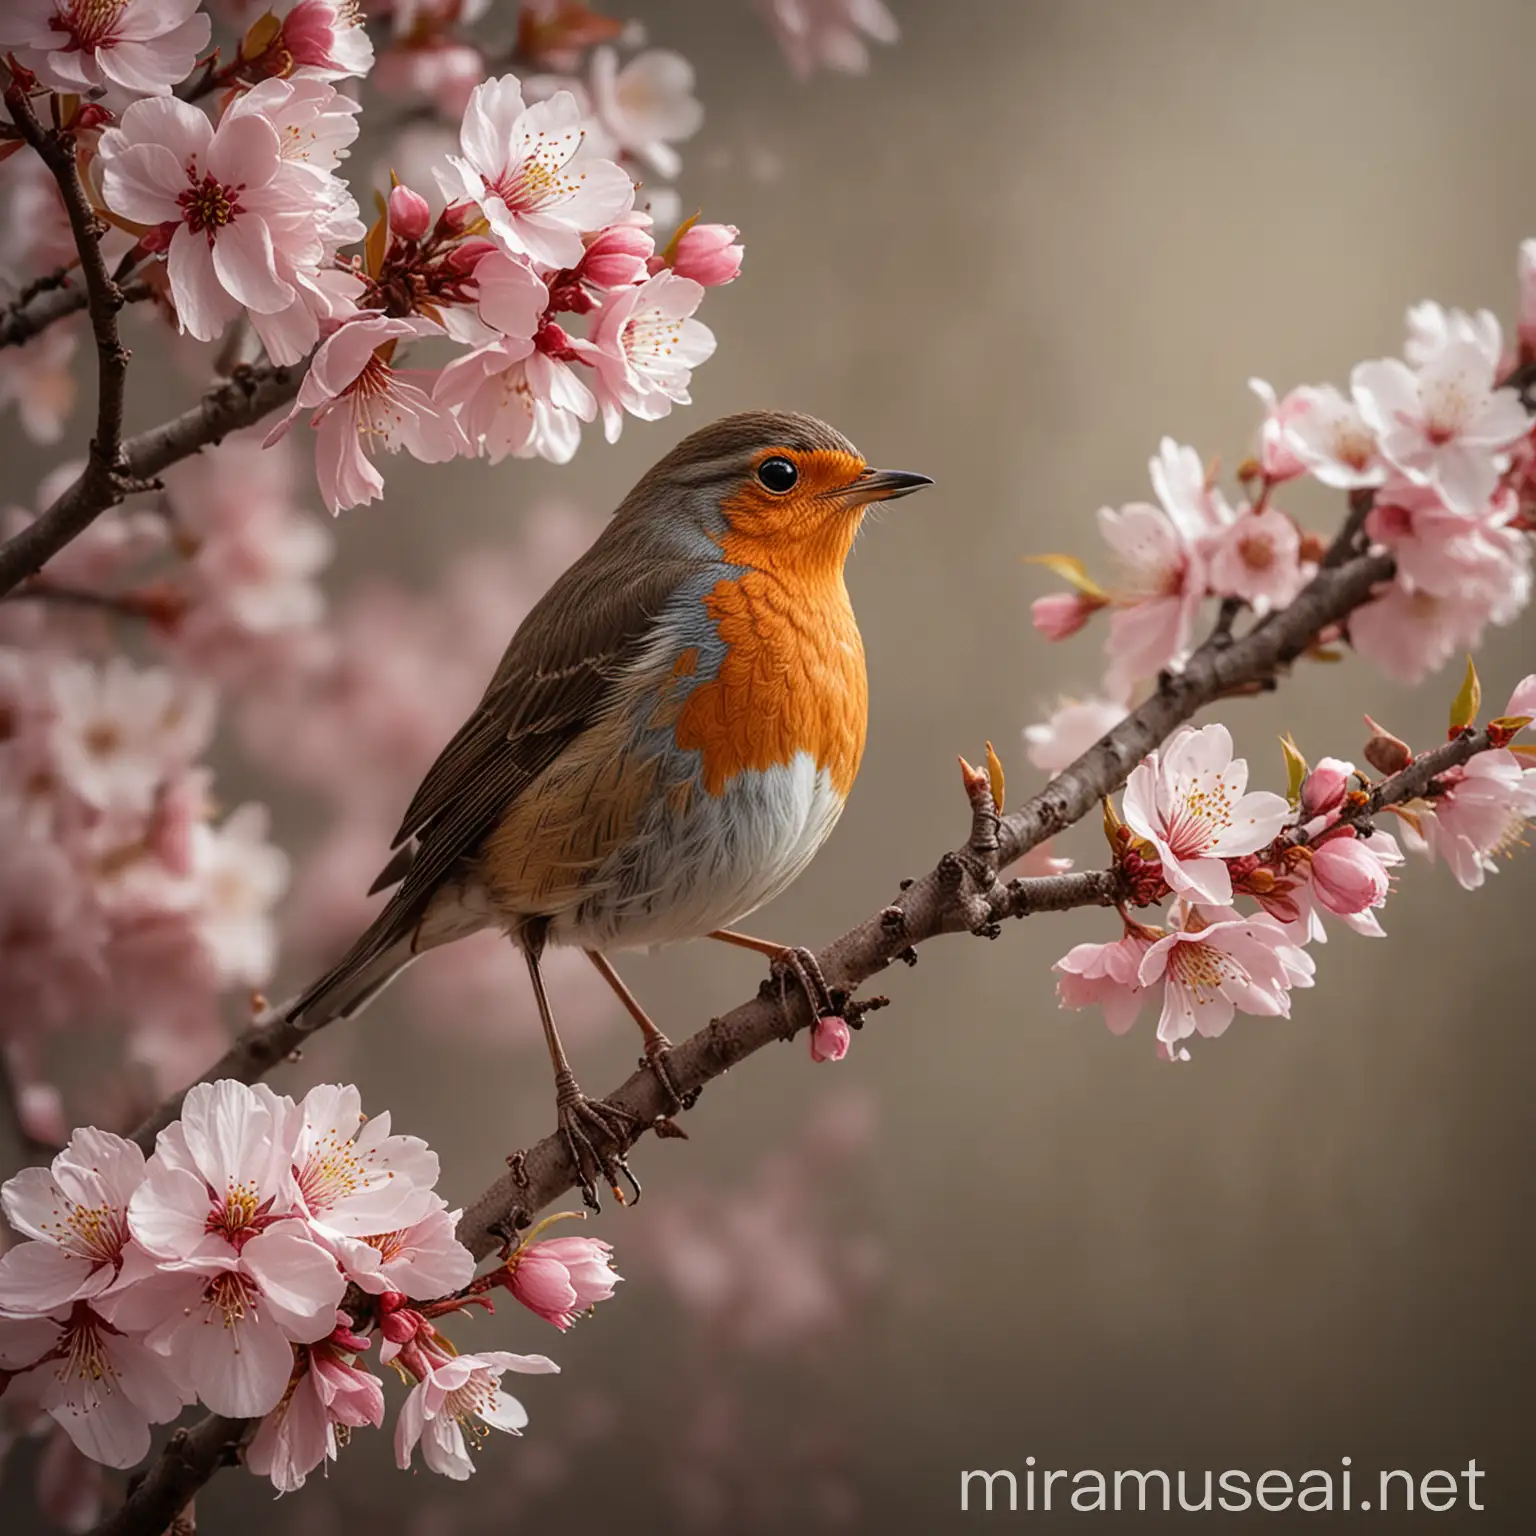 Robins Amid Cherry Blossoms Capturing Delicate Beauty in Nature